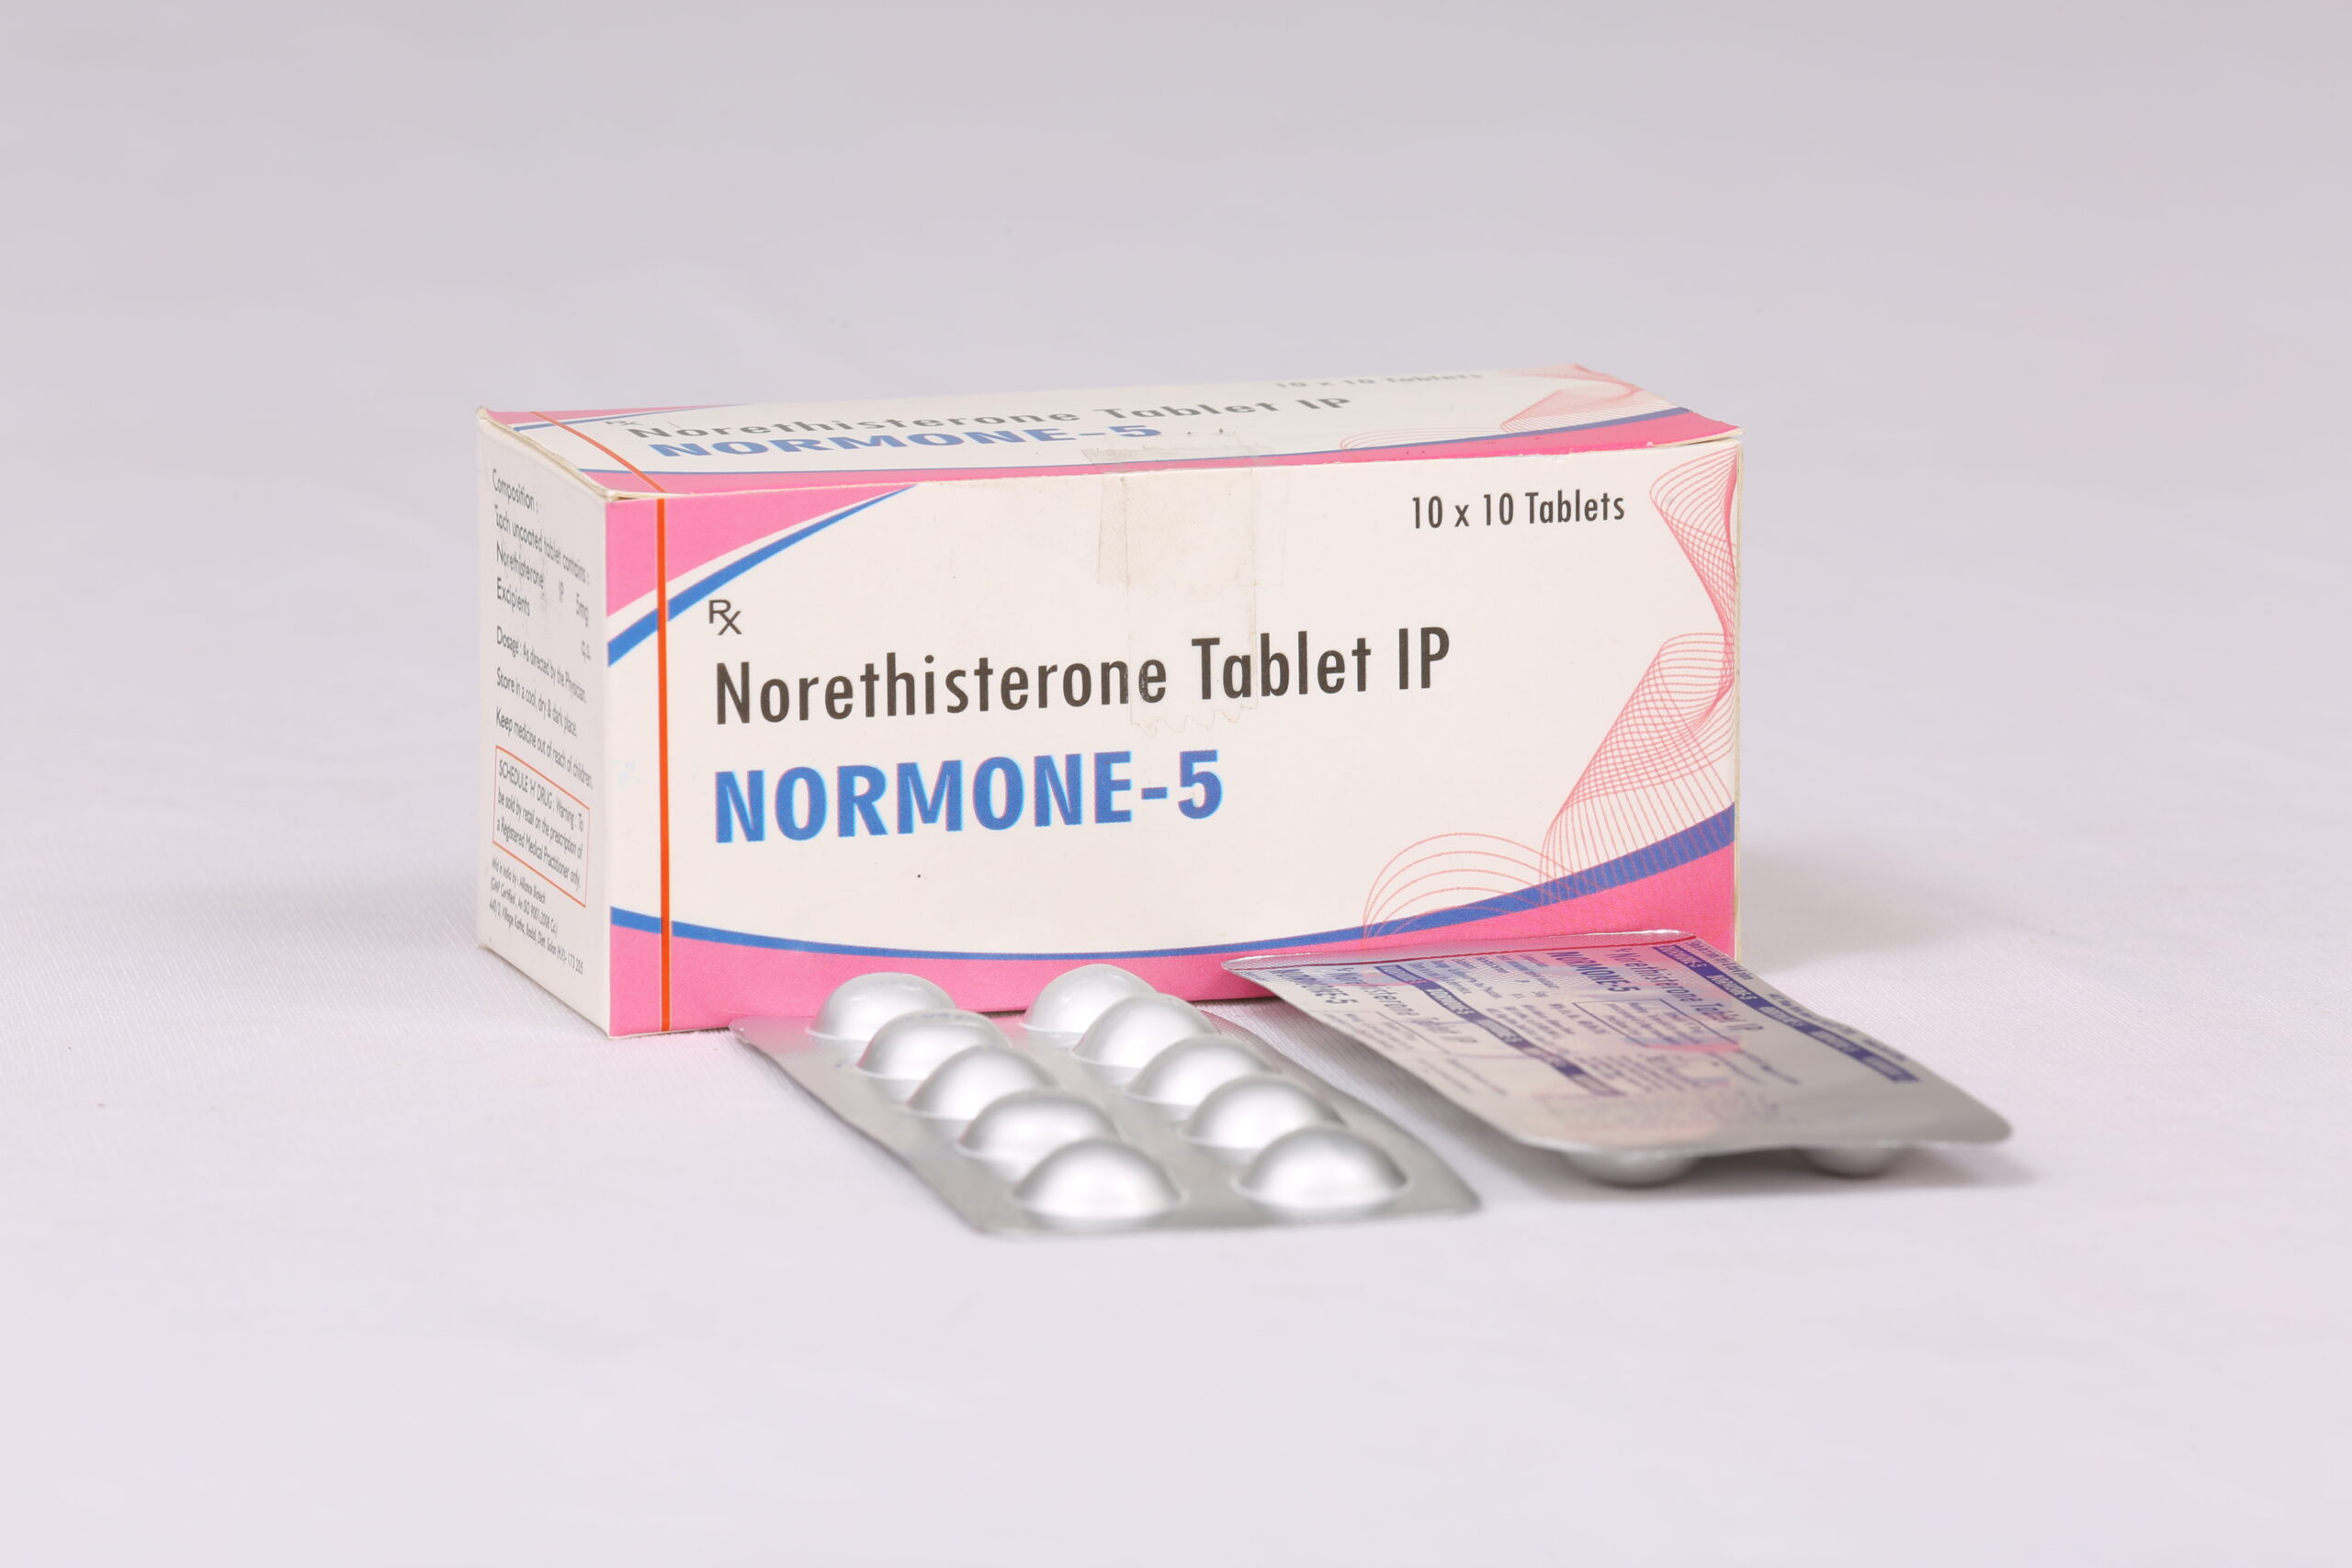 NORMONE-5 (Norethisterone 5mg)